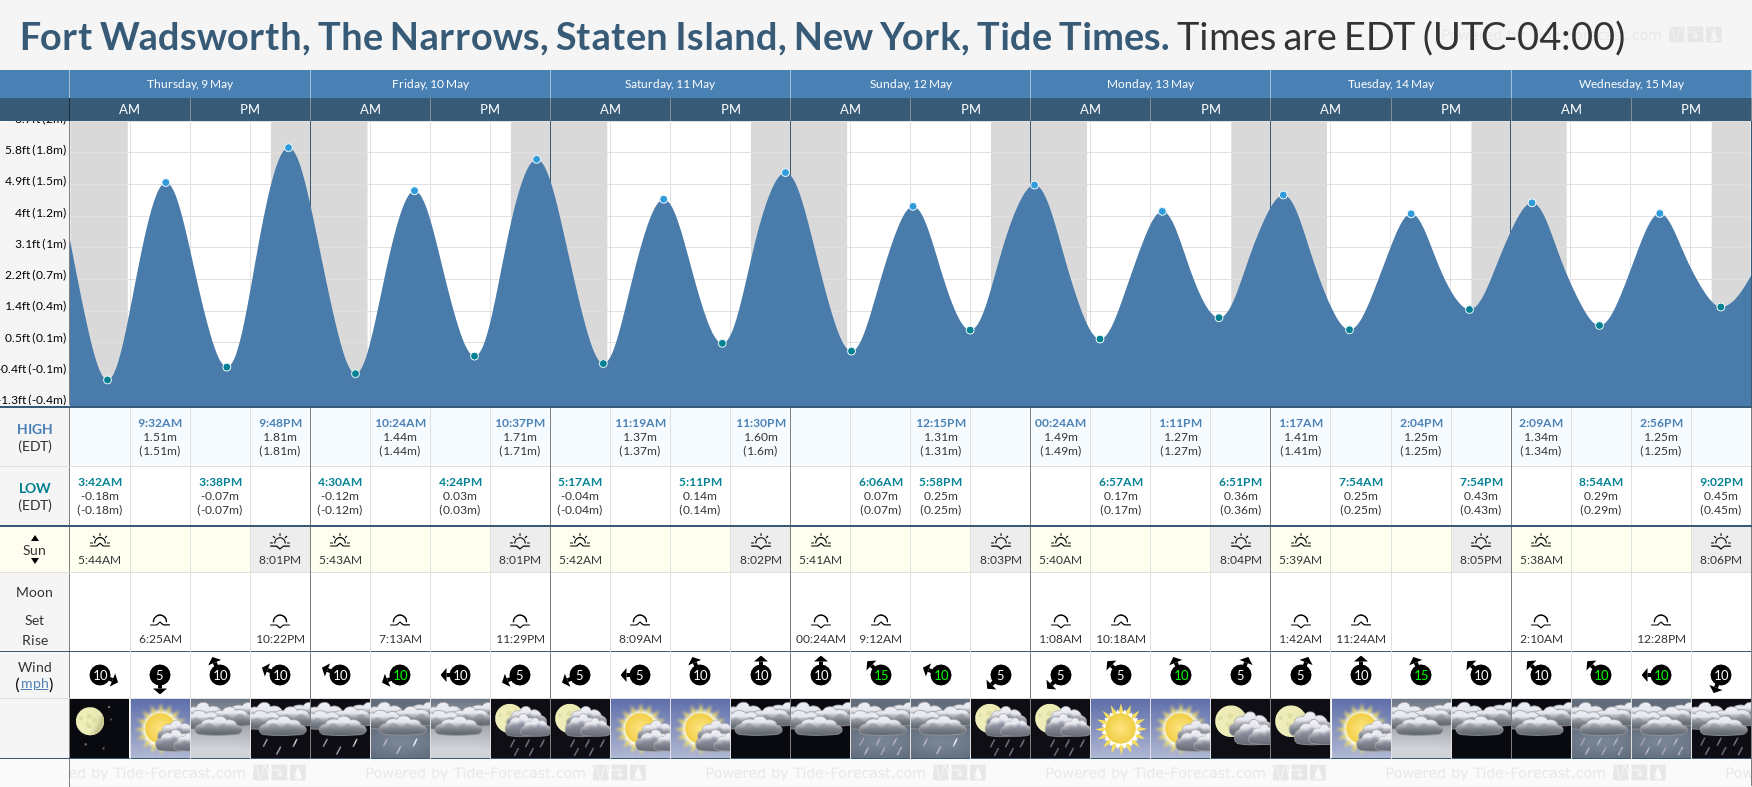 Fort Wadsworth, The Narrows, Staten Island, New York Tide Chart including high and low tide times for the next 7 days